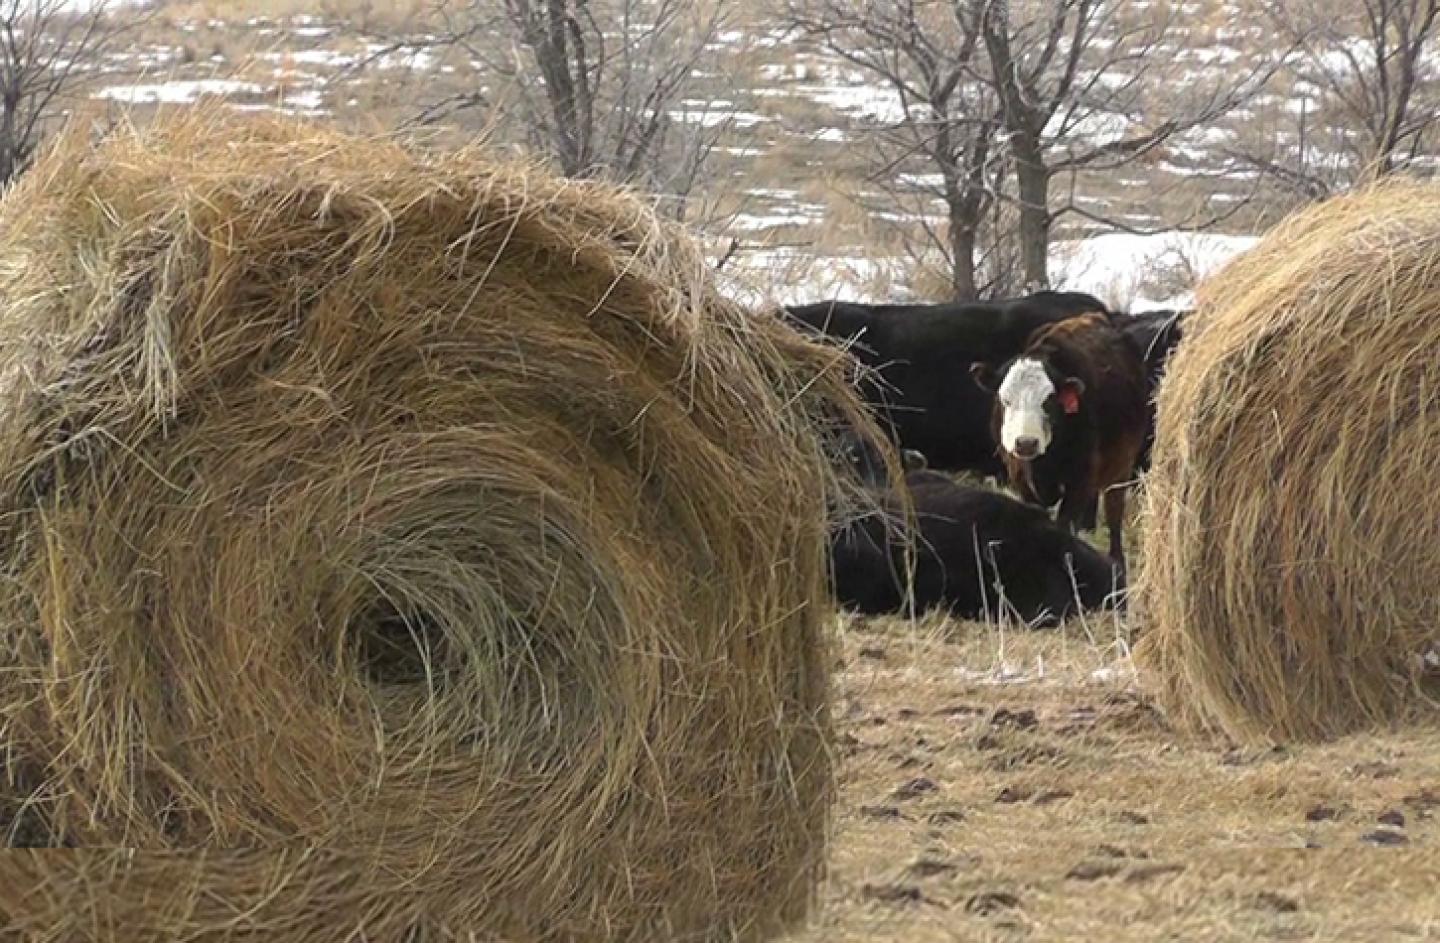 Cows, during winter, graze amidst large rolls of hay.